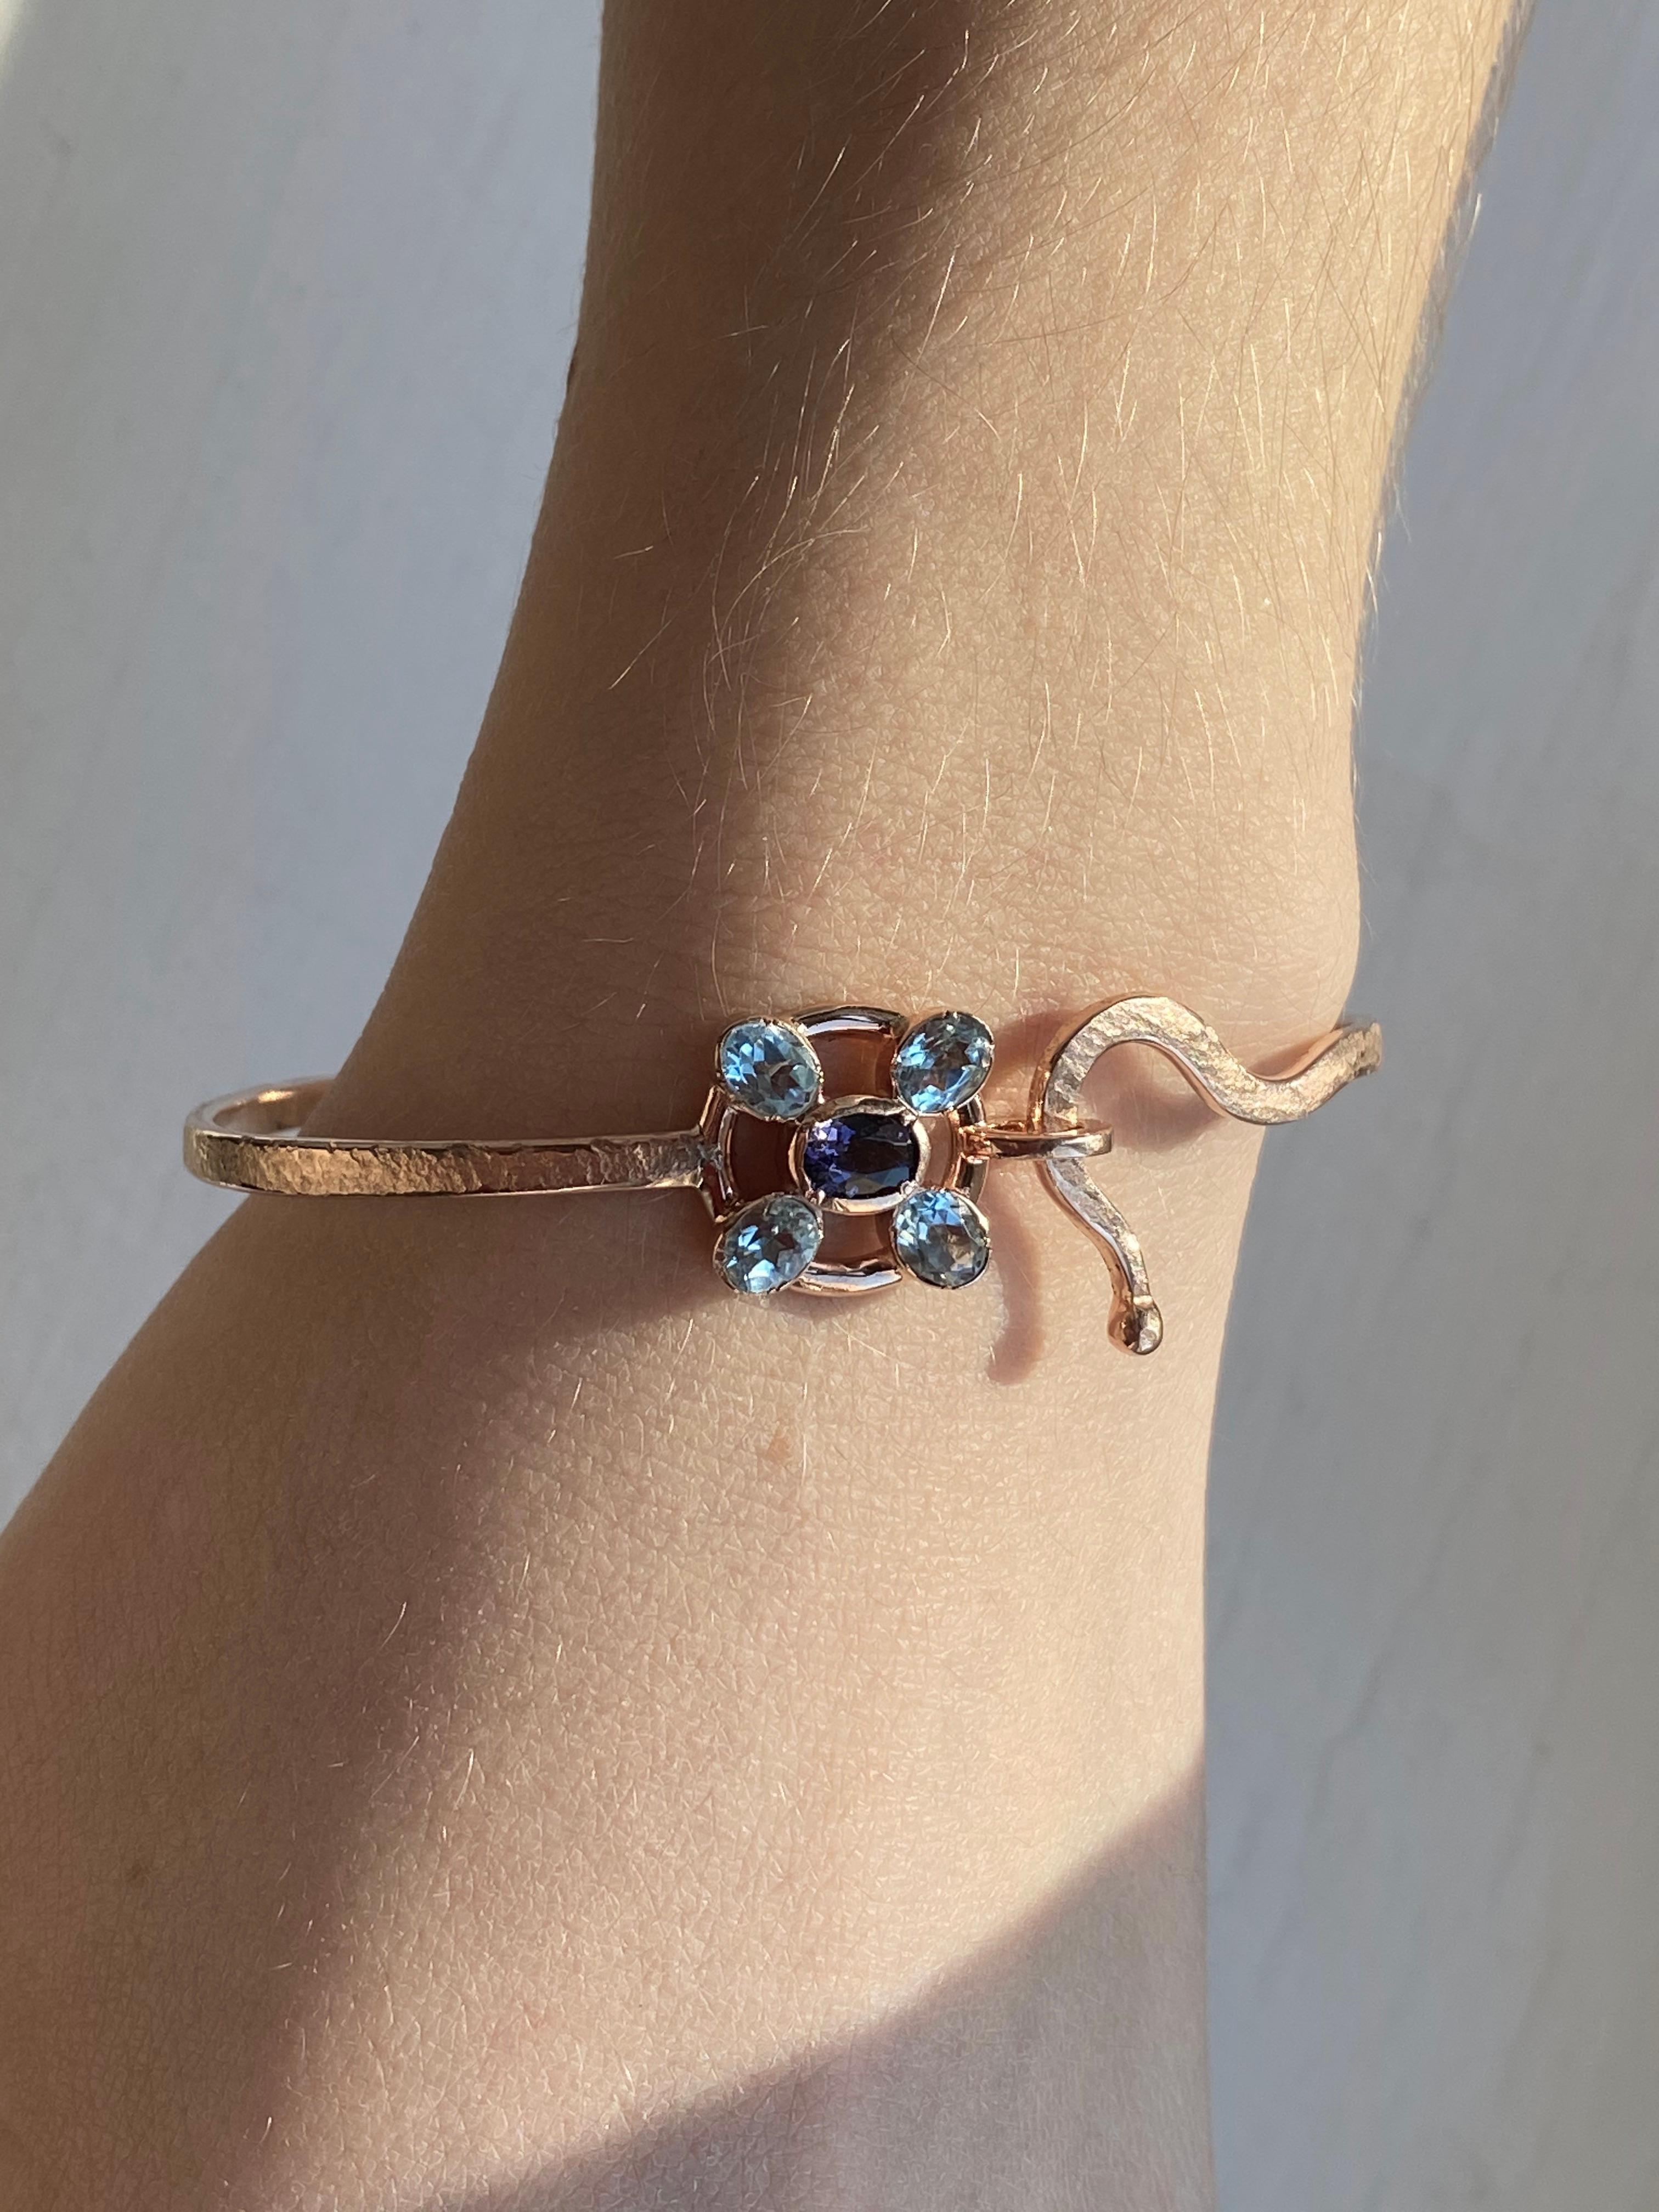 Introducing the exquisite Rossella Ugolini Design Collection, presenting a true masterpiece of jewelry craftsmanship - the handcrafted and hammered 18 Karats Rose Gold Aquamarine Blue Sapphires Bangle Modern Design Bracelet.  
Crafted with